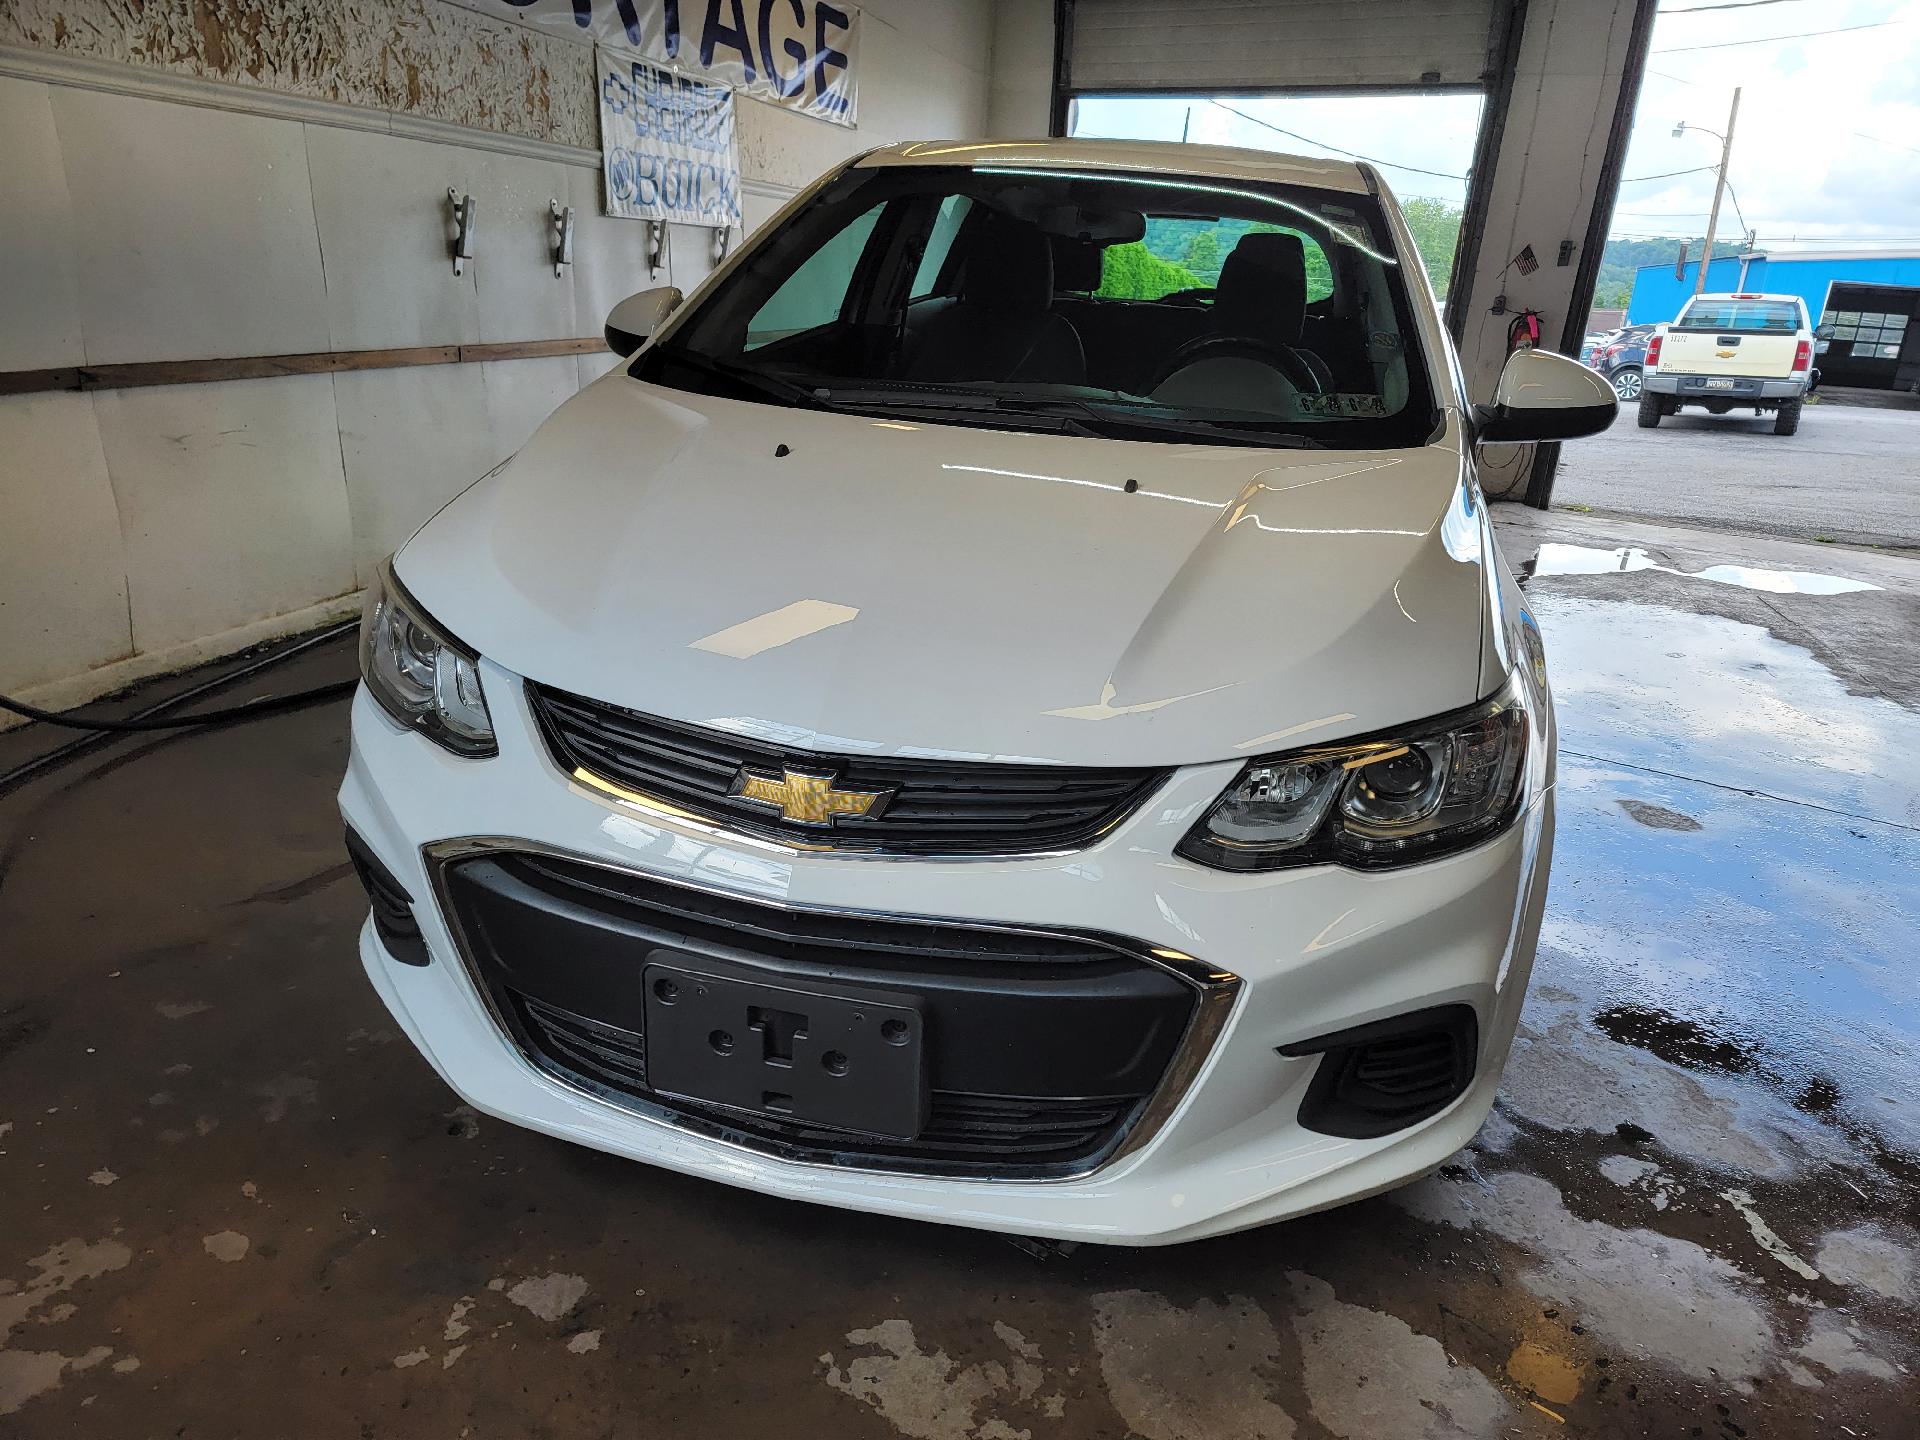 Used 2018 Chevrolet Sonic 1FL with VIN 1G1JG6SG4J4106547 for sale in Portage, PA